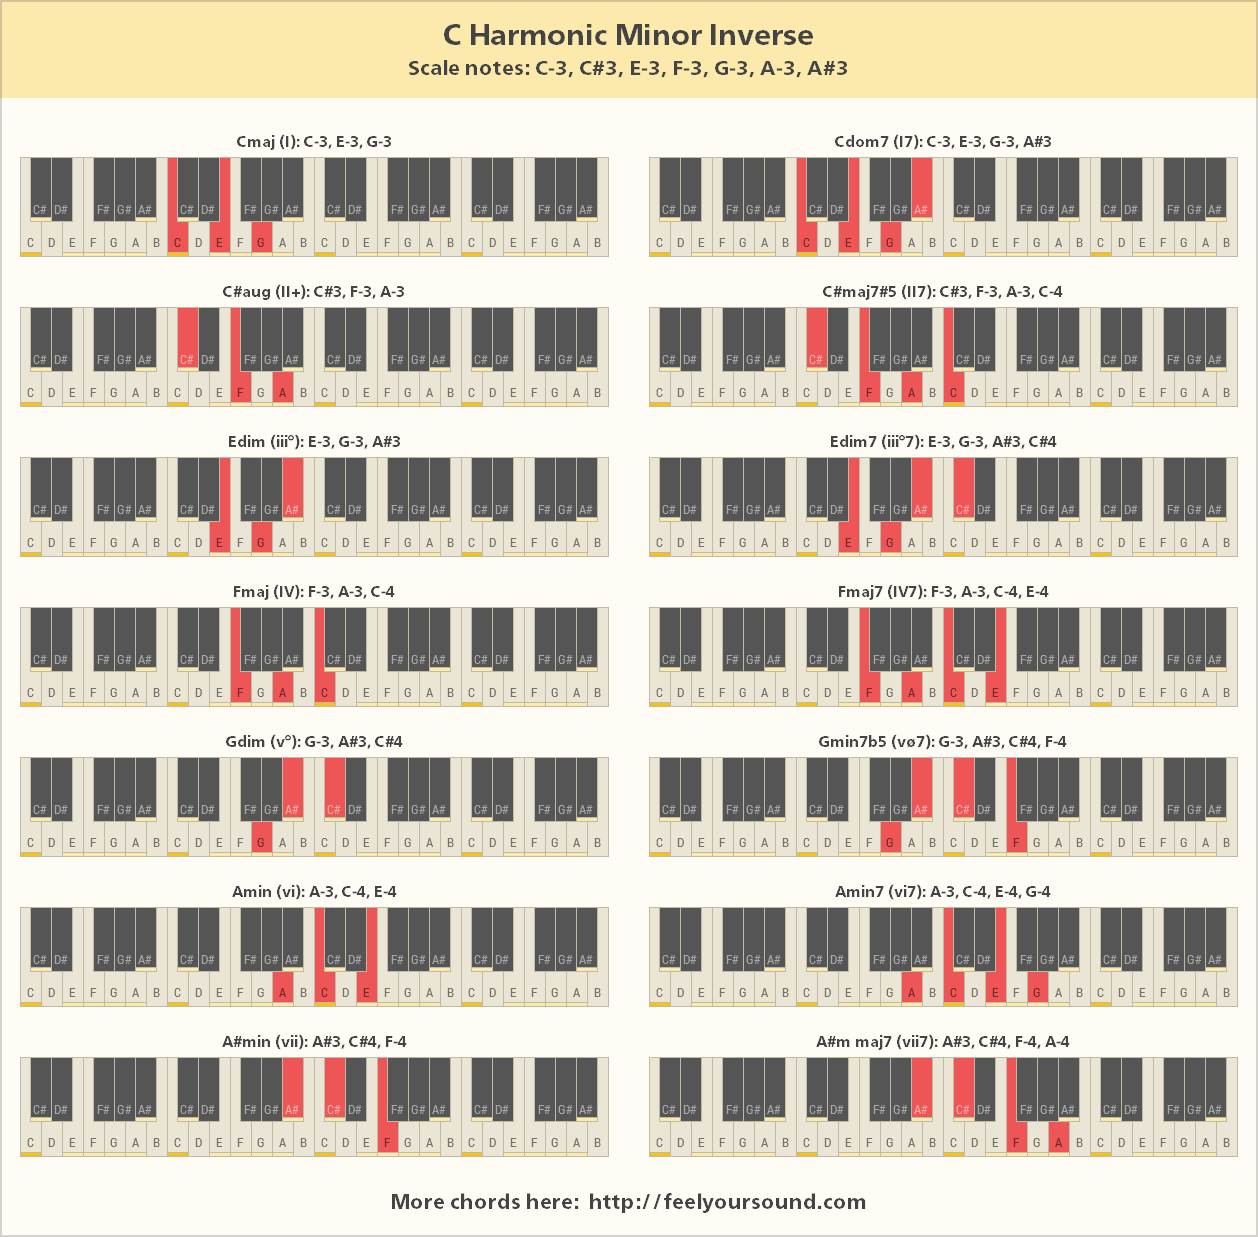 All important chords of C Harmonic Minor Inverse